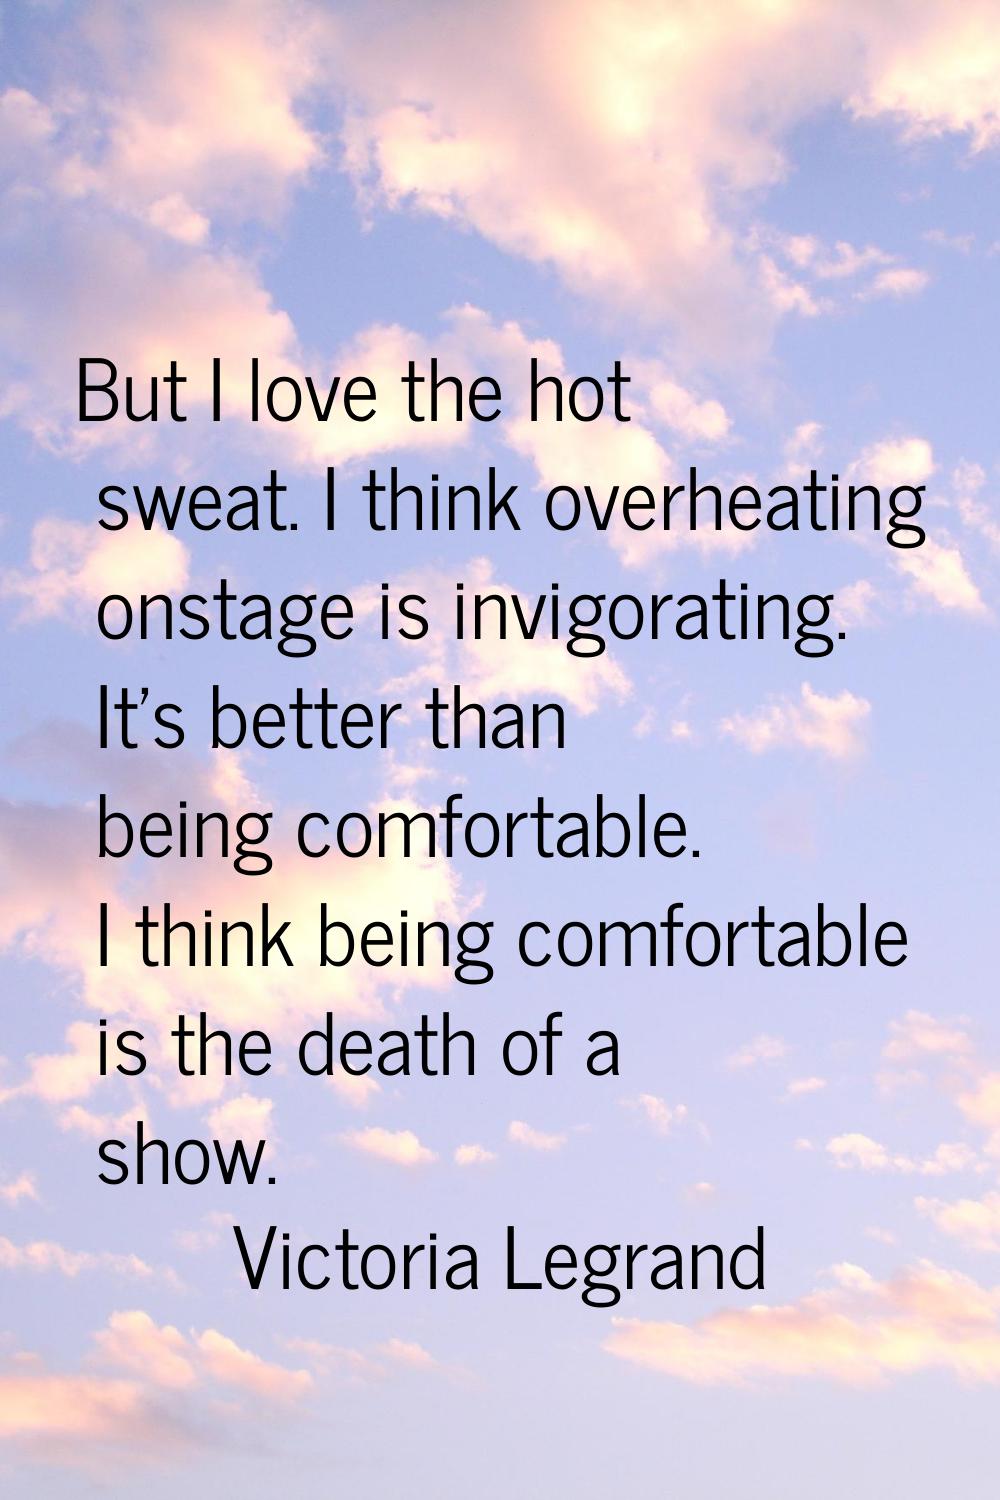 But I love the hot sweat. I think overheating onstage is invigorating. It's better than being comfo